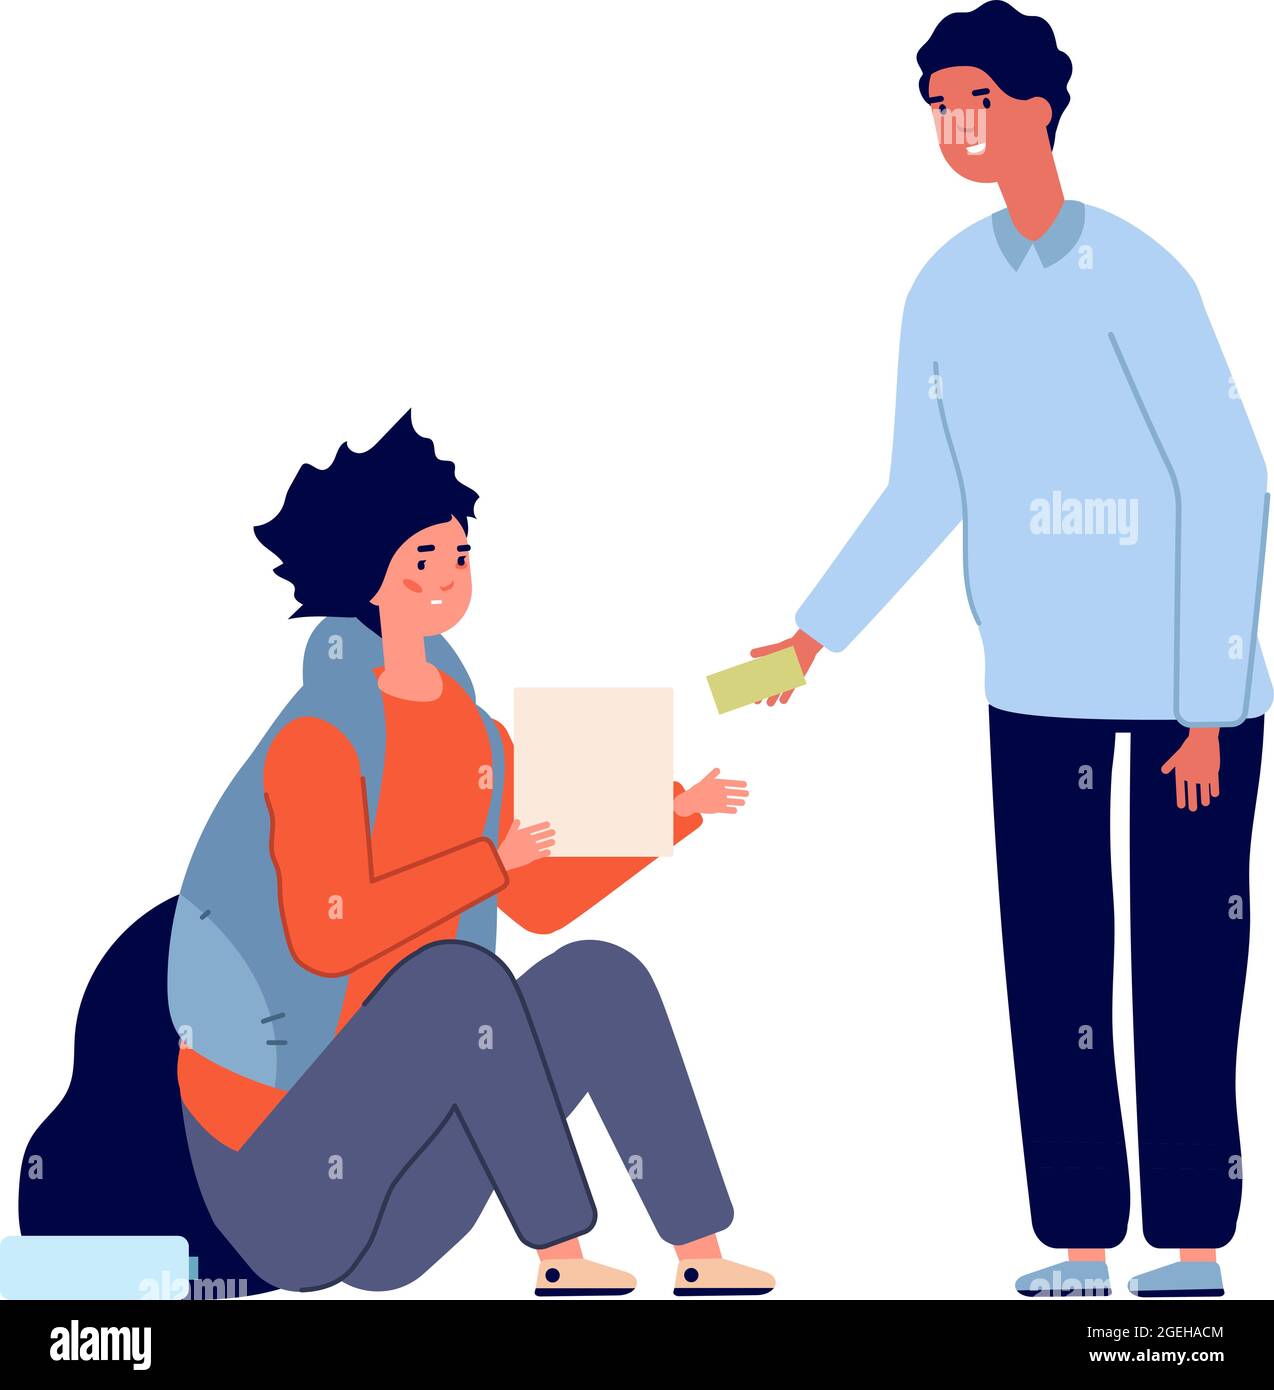 Alms concept. Social inequality, rich man and poor woman. Homeless people need help, charity or donation vector illustration Stock Vector